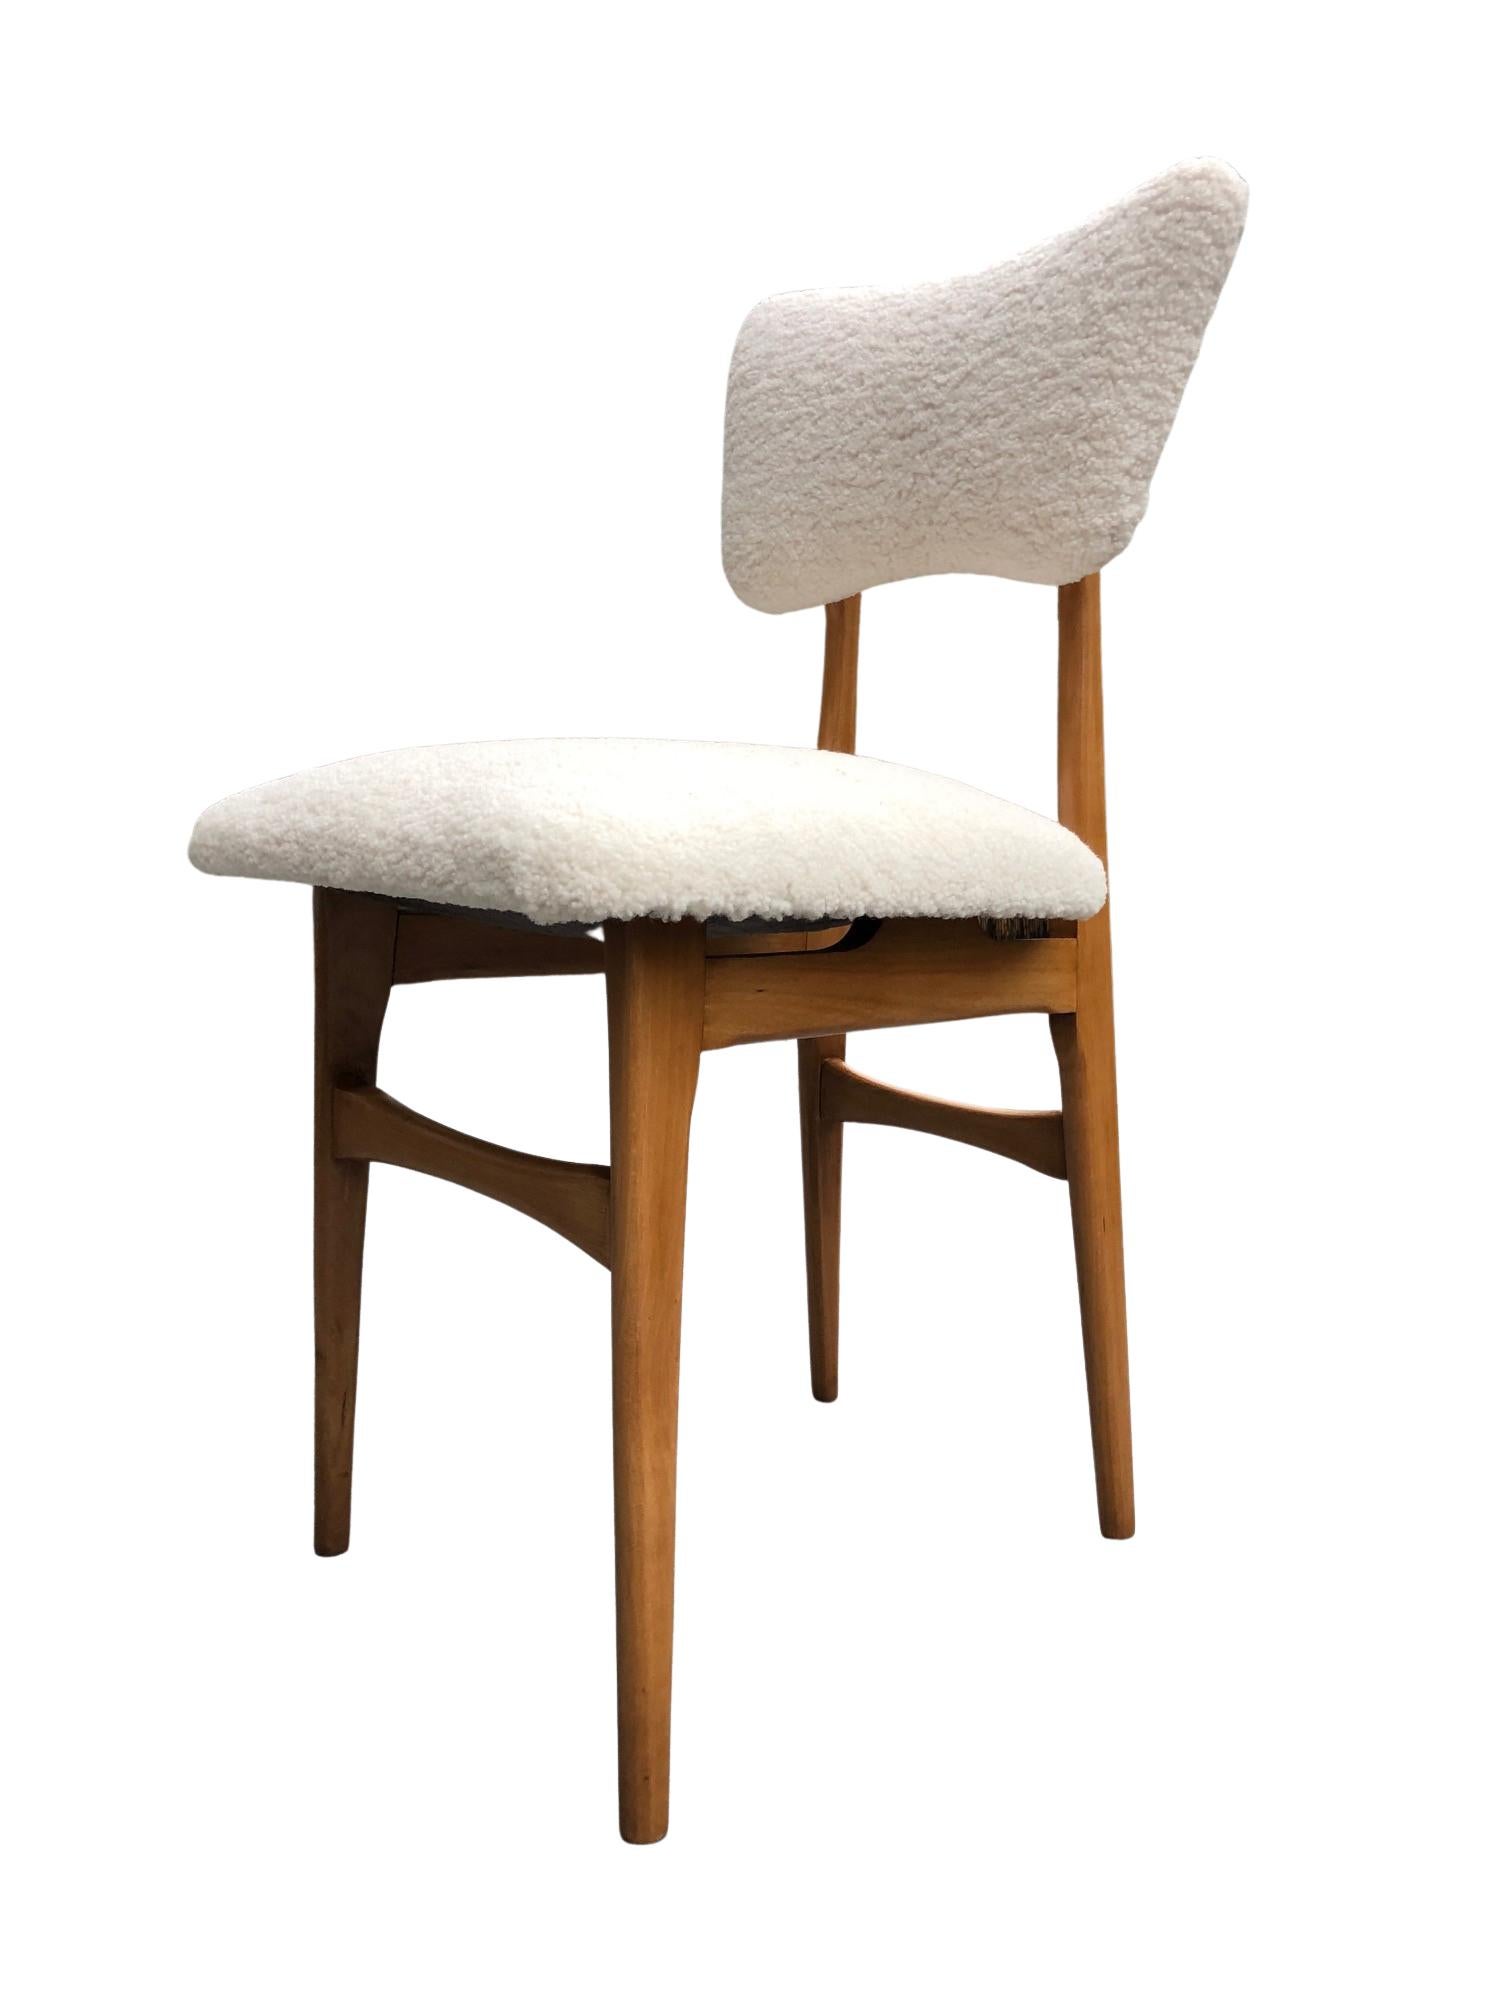 Hand-Crafted Midcentury Cream Bouclé and Wood Dining Chair, Europe, 1960s For Sale